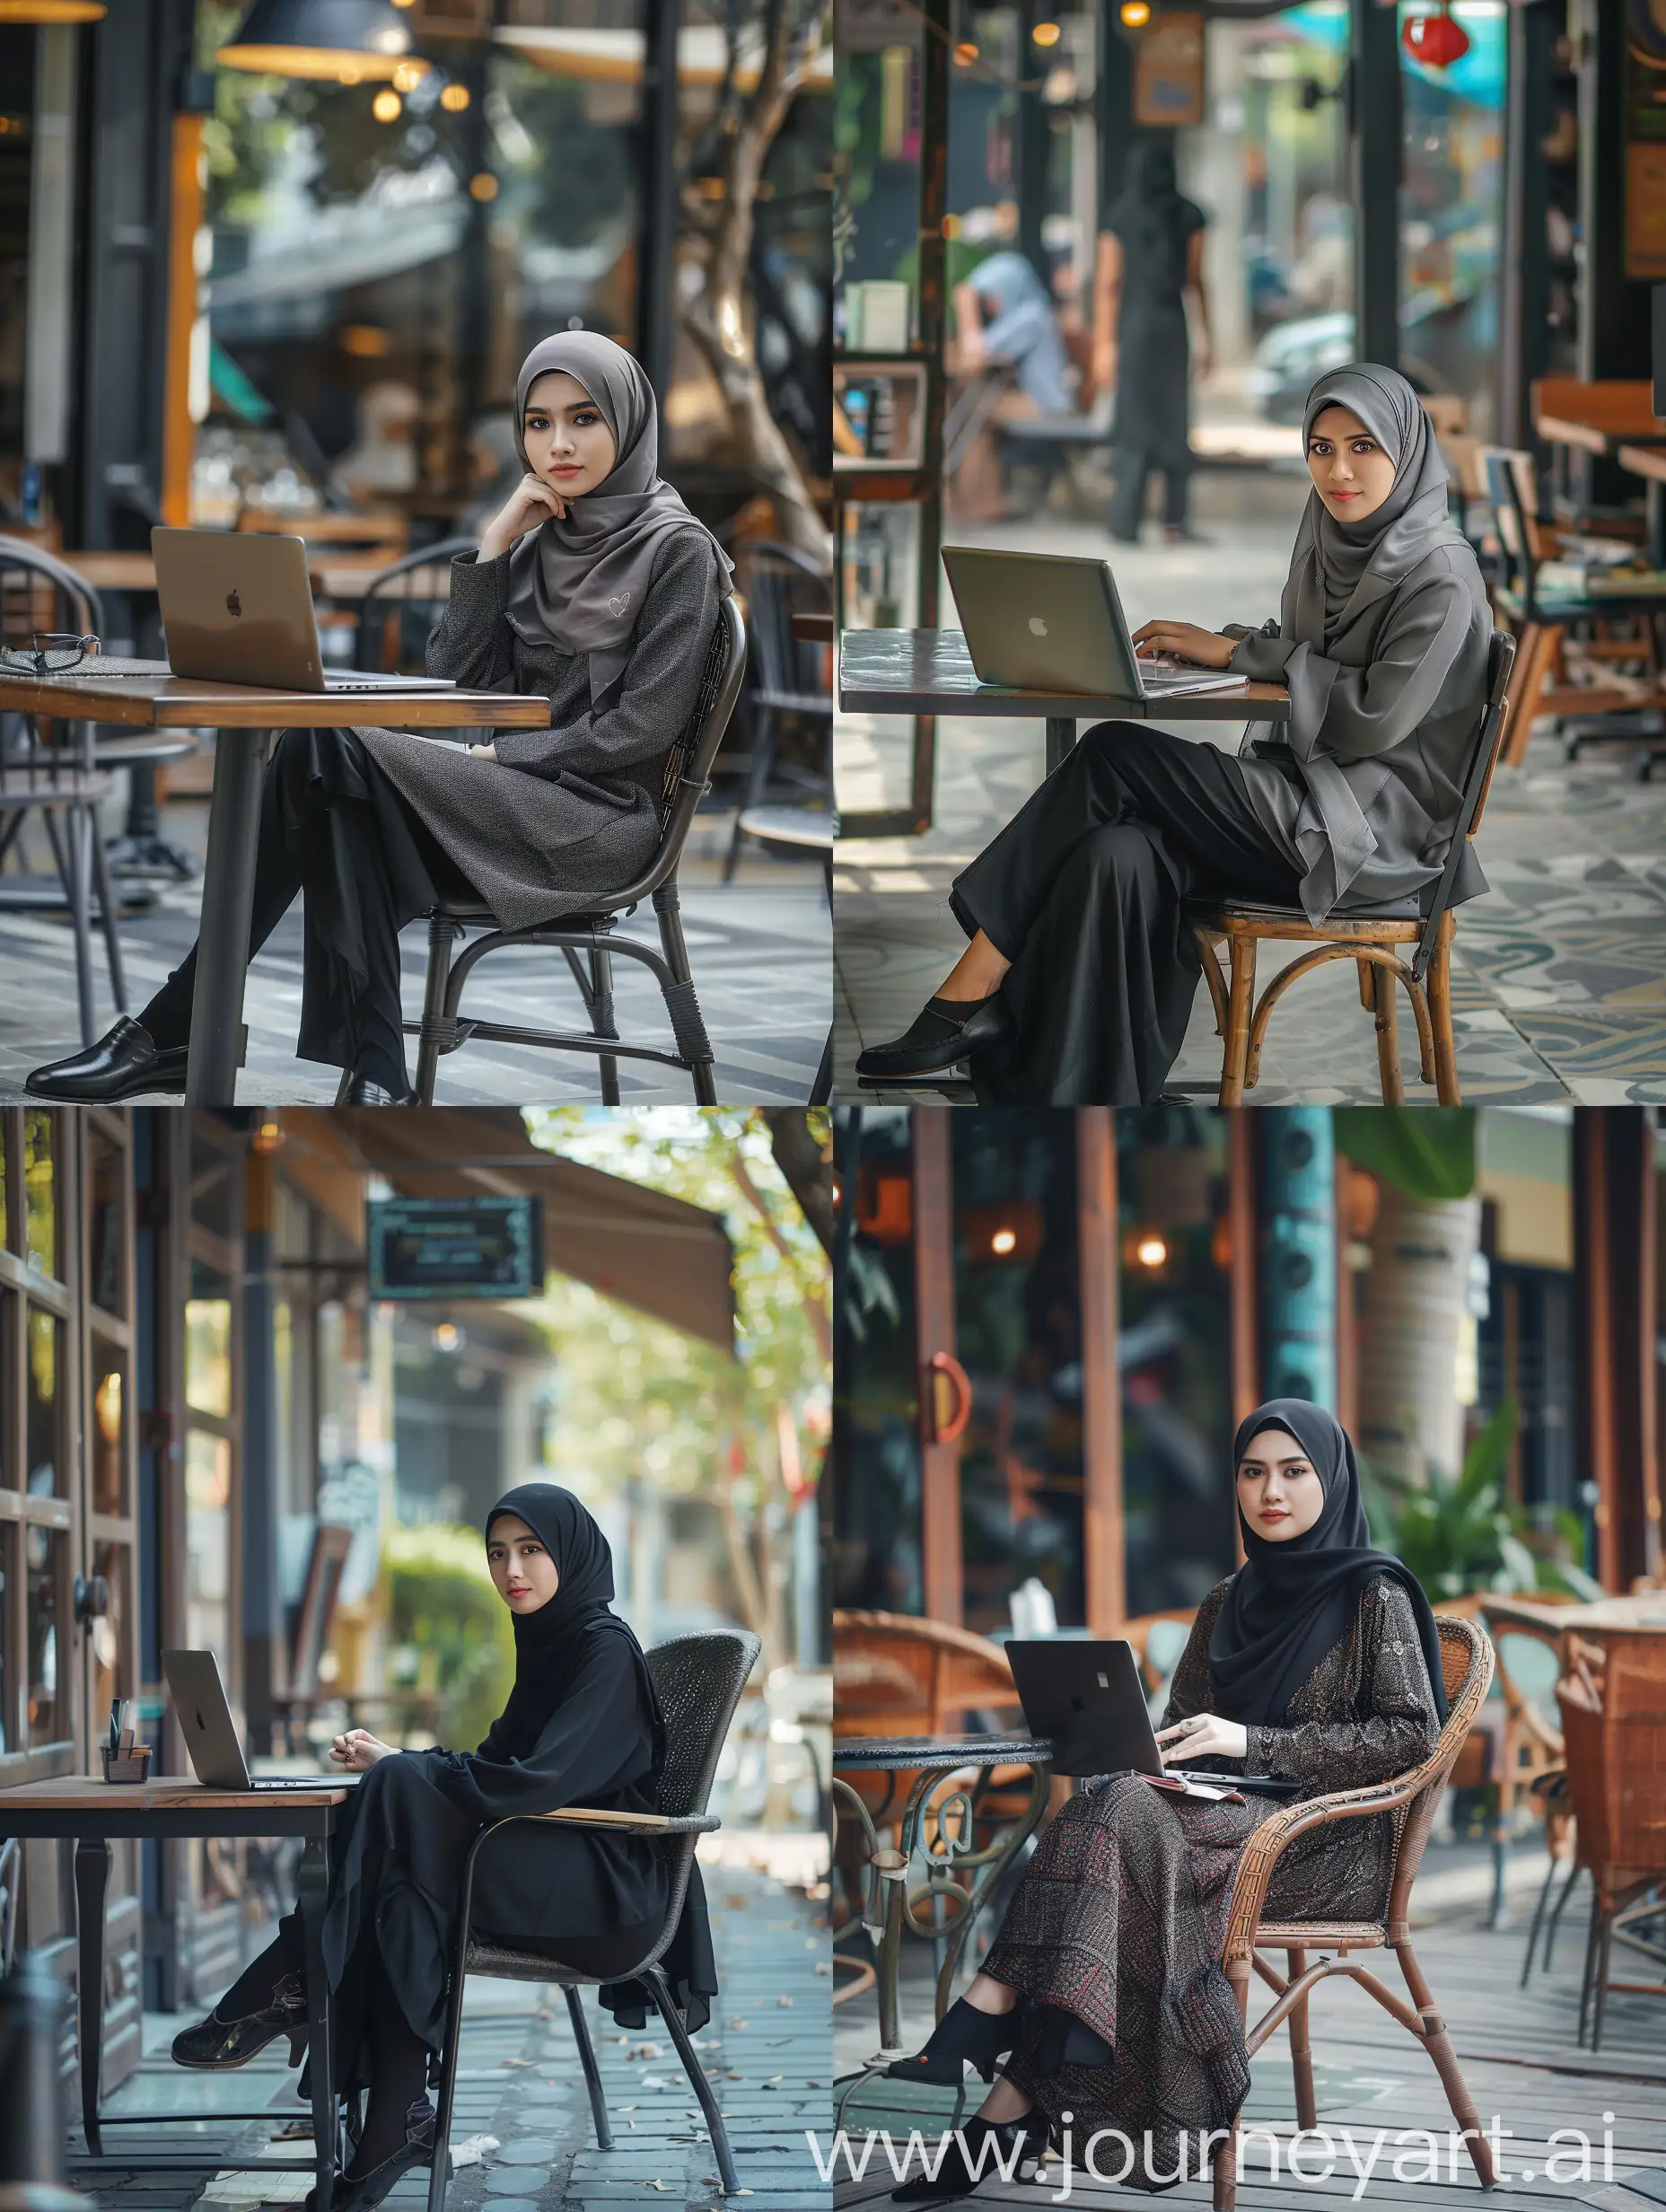 indonesian beautiful woman, wearing hijab, arabian face, wearing official dress with shiny black shoes, sitting relax in a chair with table, there's a laptop on the table, outdoor cafe background, cinematic, very detail, ultra HD, sharp focus, realistic photography